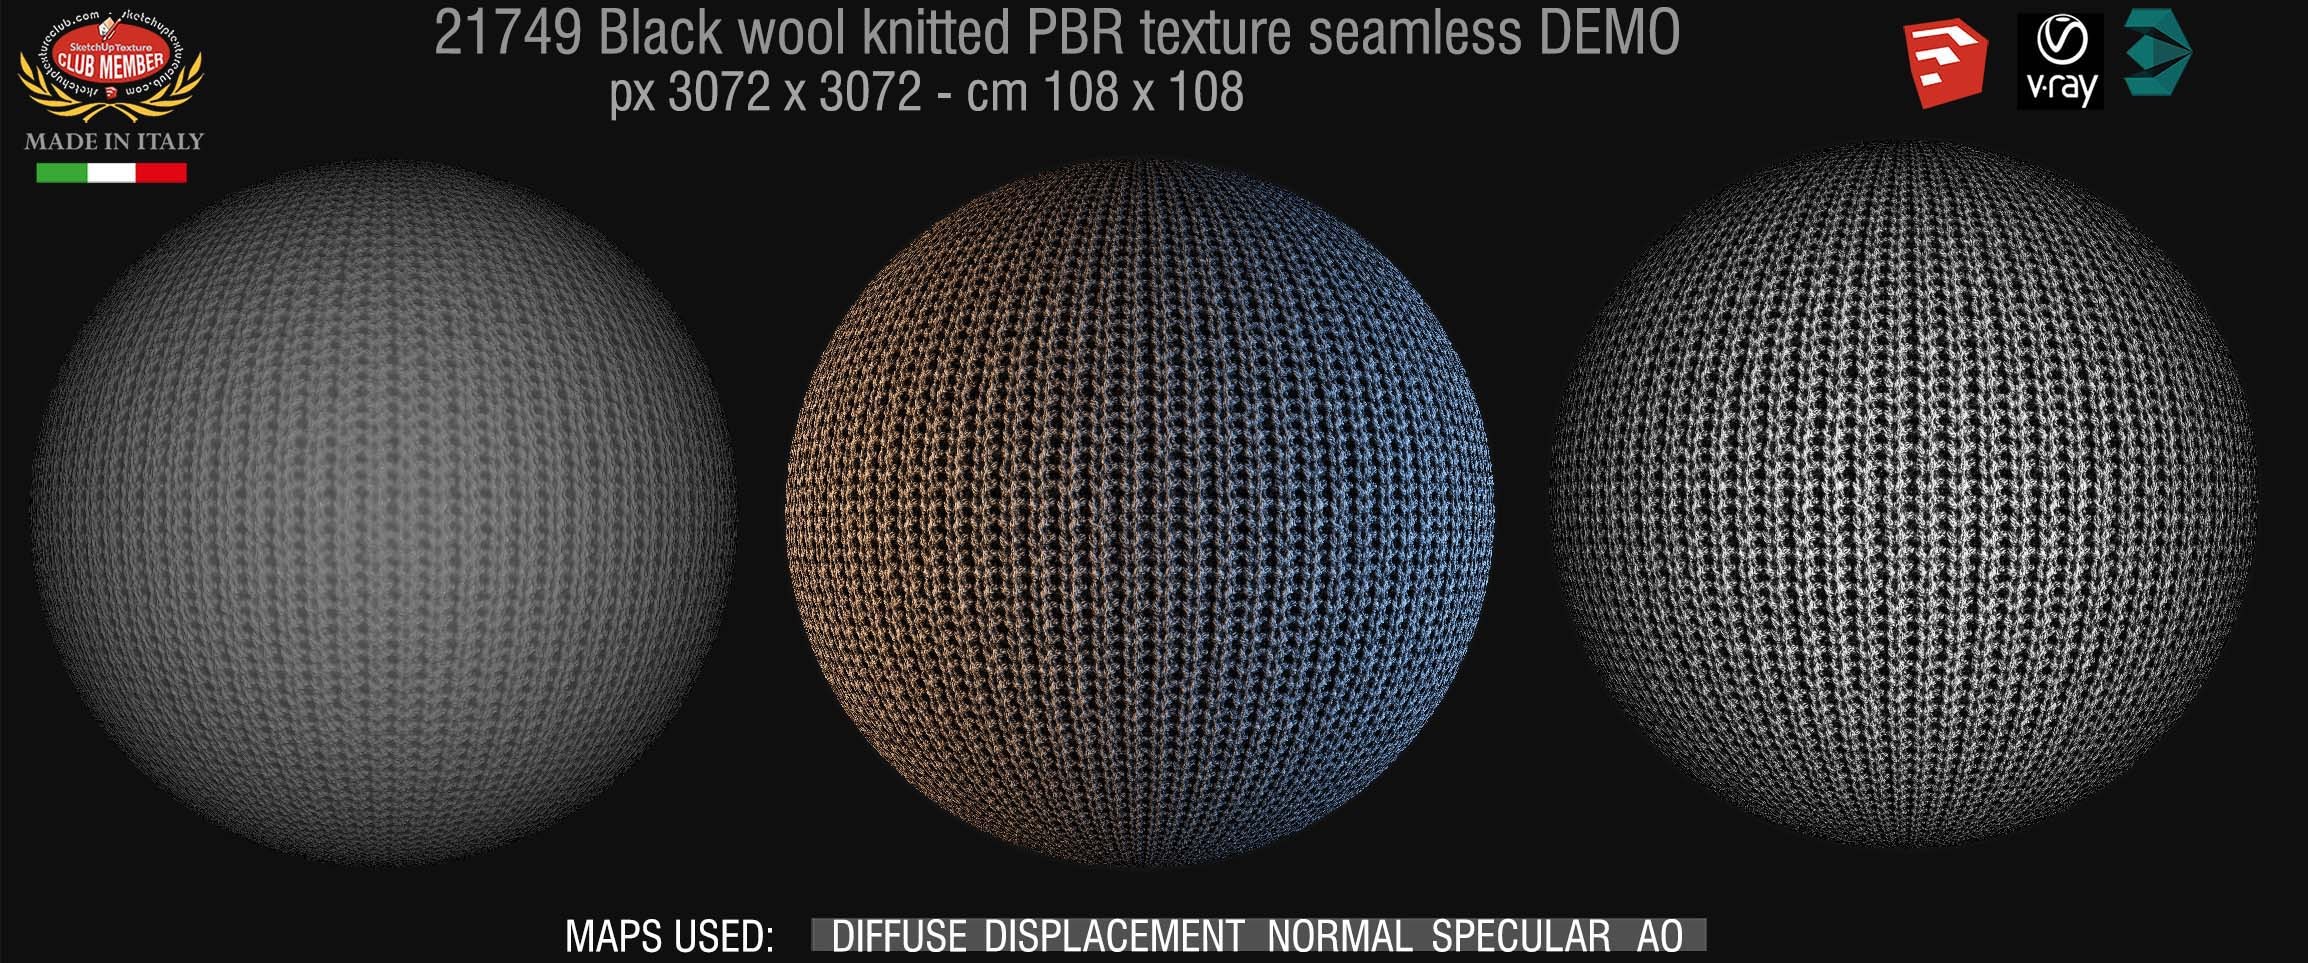 21749 Black wool knitted PBR texture seamless DEMO